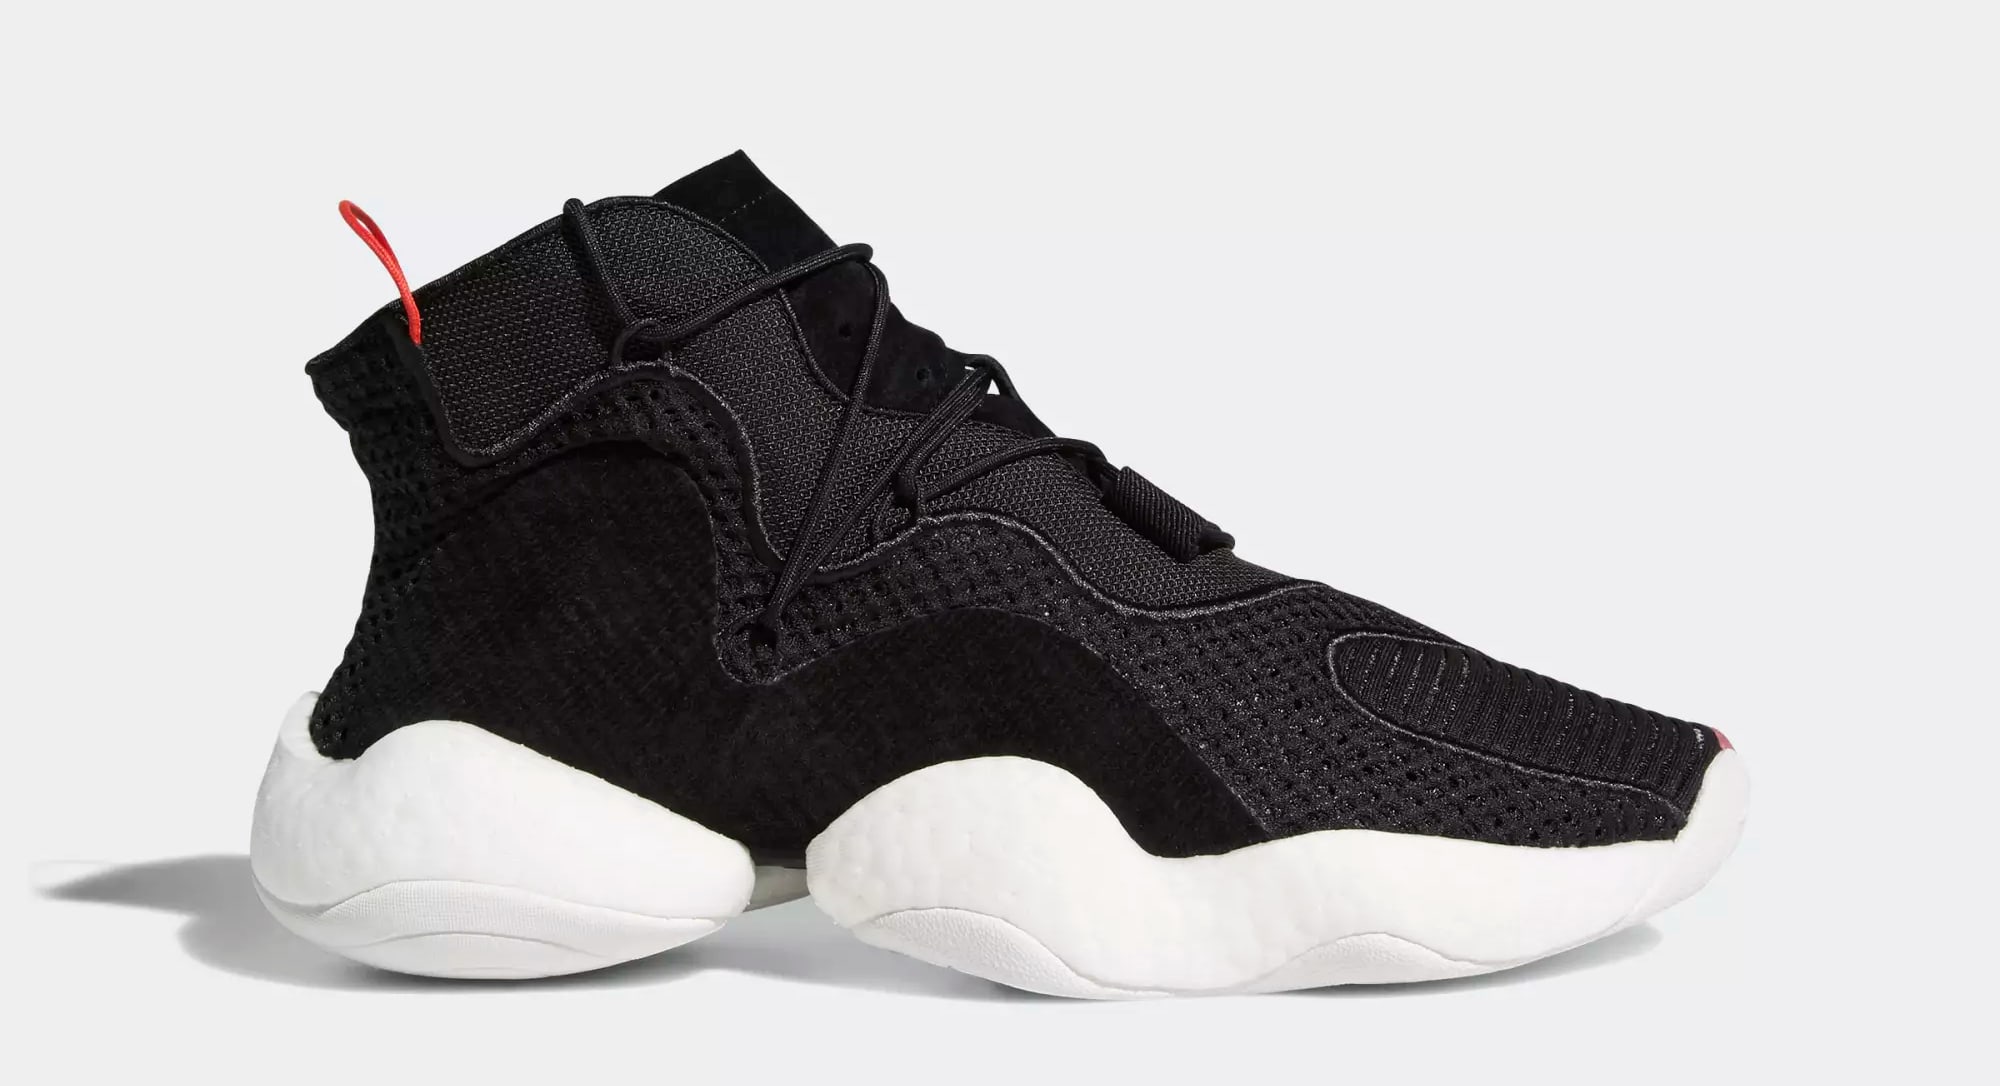 Adidas Crazy BYW &#x27;Core Black/Cloud White/Bright Red&#x27; B37480 (Lateral)